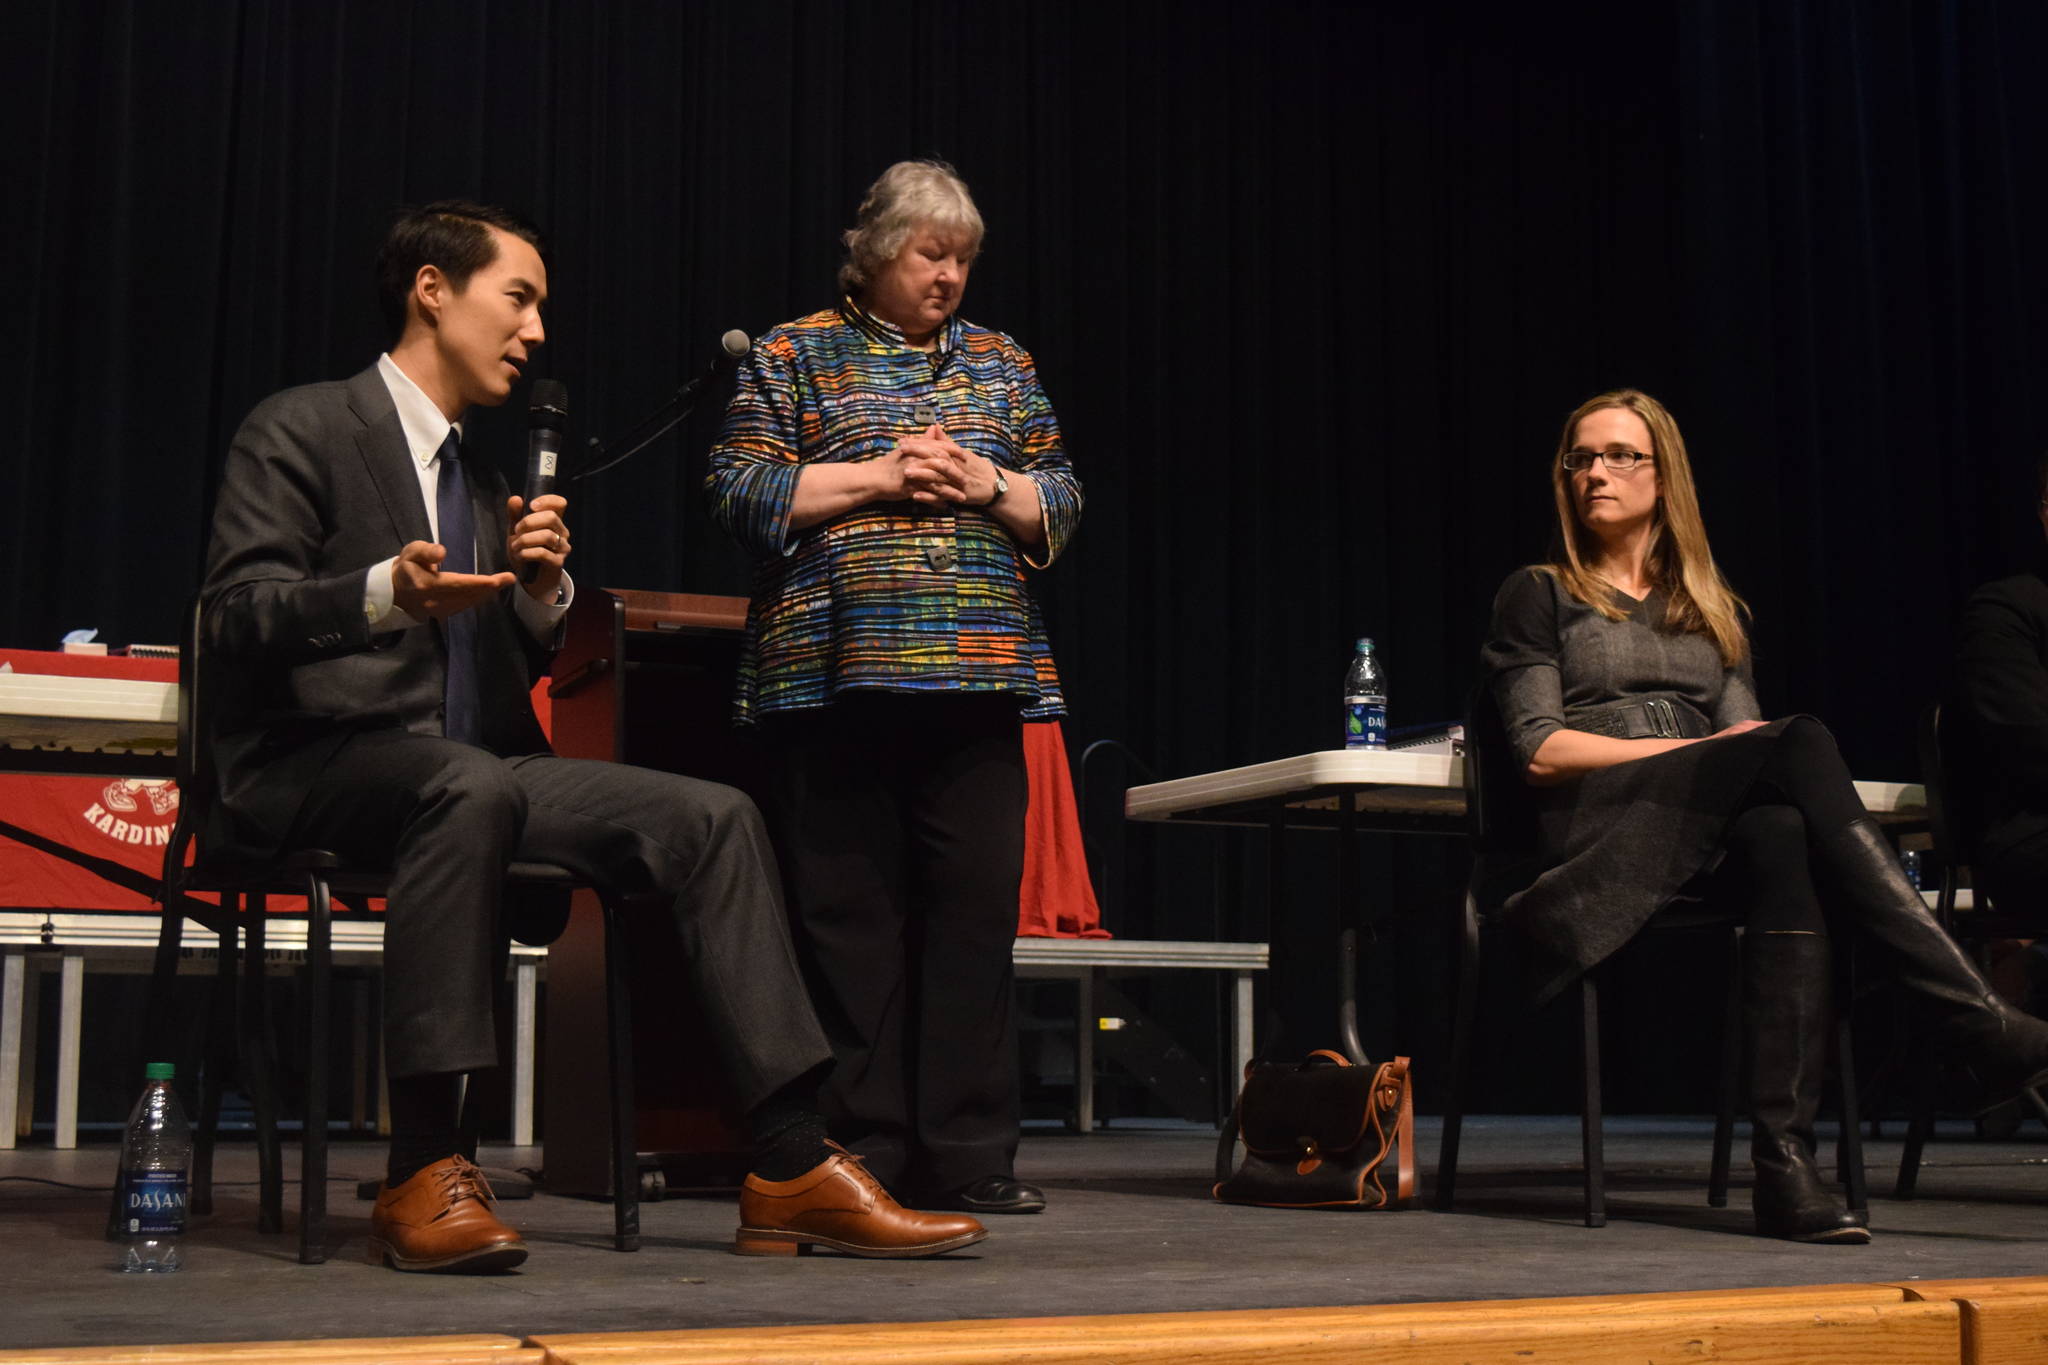 Attorney Jon Choate, left, representing the Alaska Democratic Party, and state attorney Laura Fox, discuss the ins and outs of the case after the oral arguments on Thursday as part of the Supreme Court Live event moderated by Marilyn May, center, at Kenai Central High School. (Photo by Kat Sorensen/Peninsula Clarion)